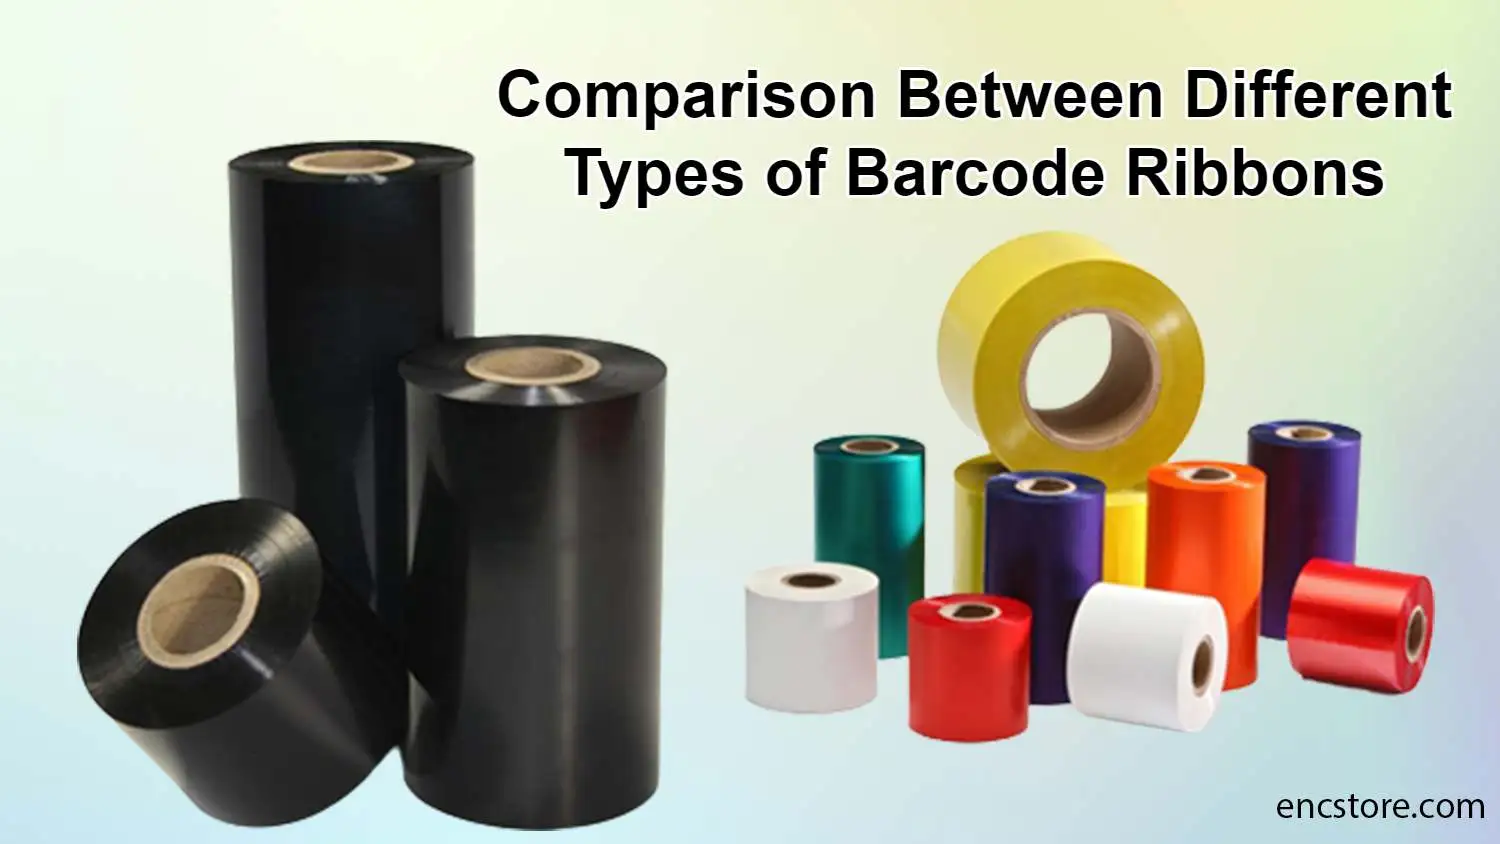 Different Types of Barcode Ribbons